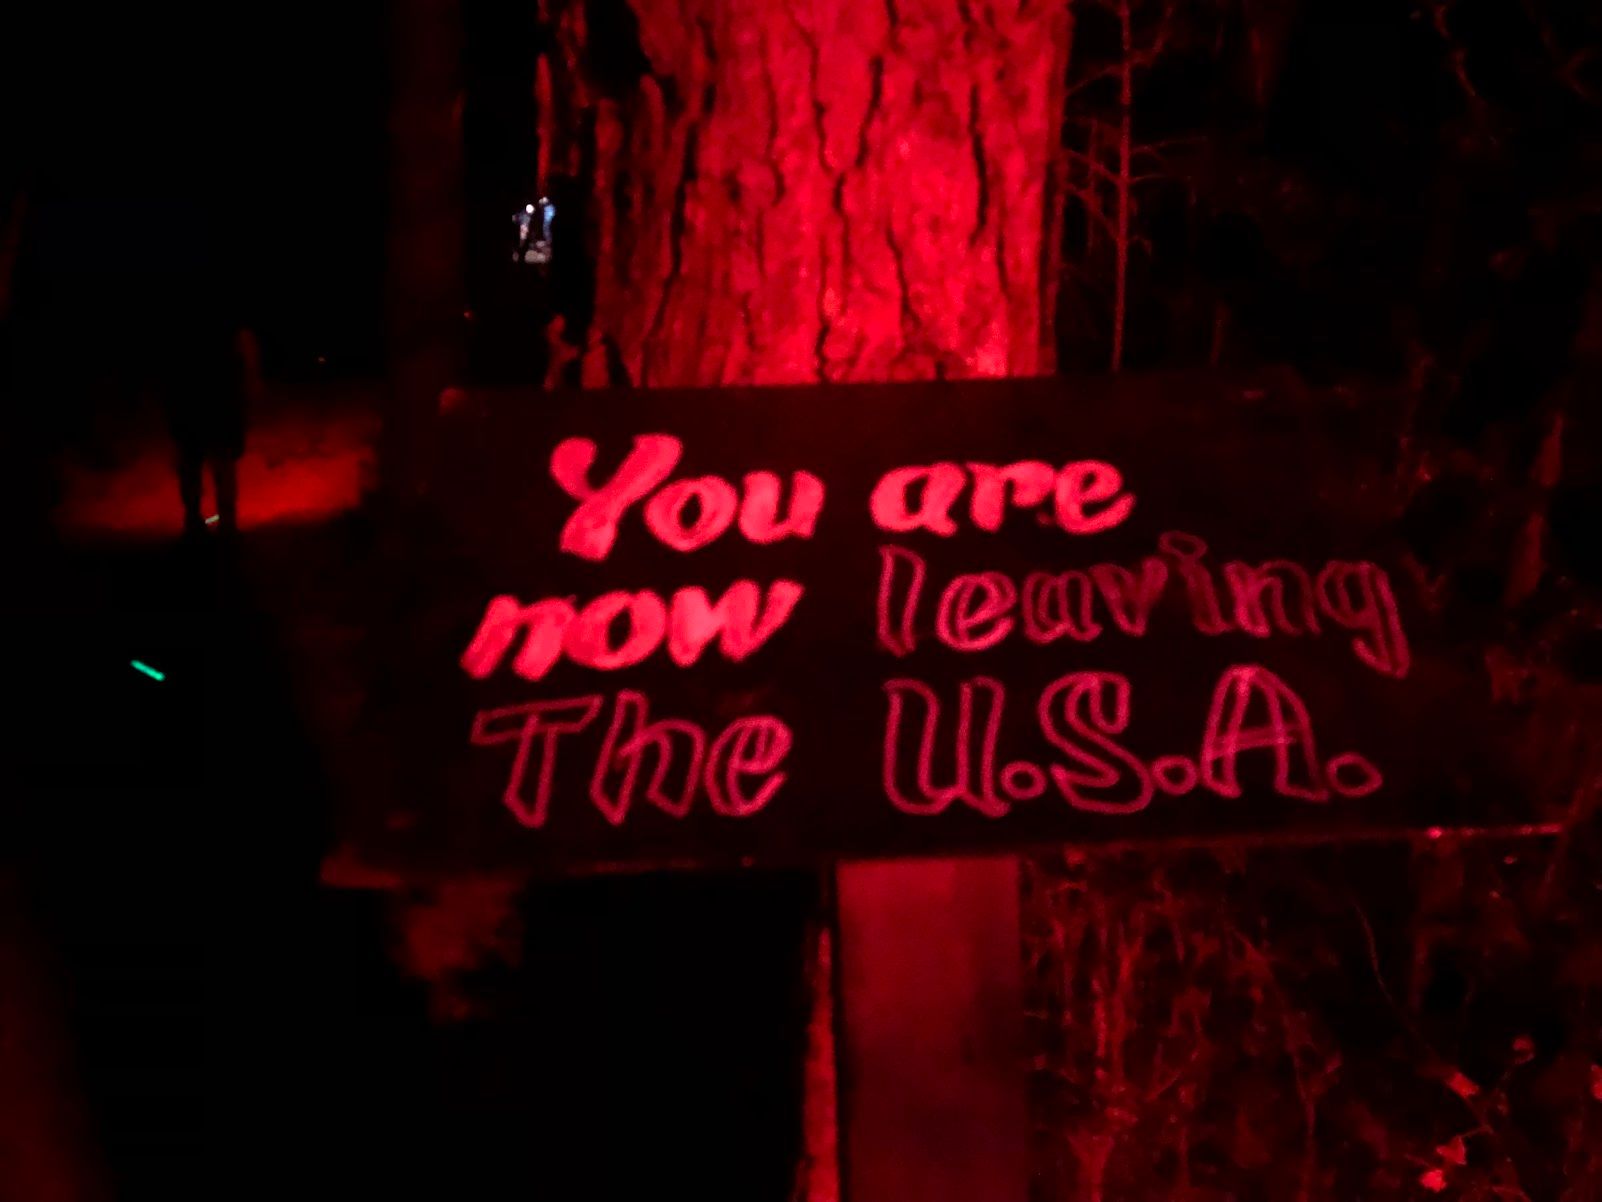 July 2022. A hand-painted sign reading "You are now leaving the U.S.A." The photo is awash in red light. Using red light at a nighttime campsite can help your eyes acclimate to the dark.